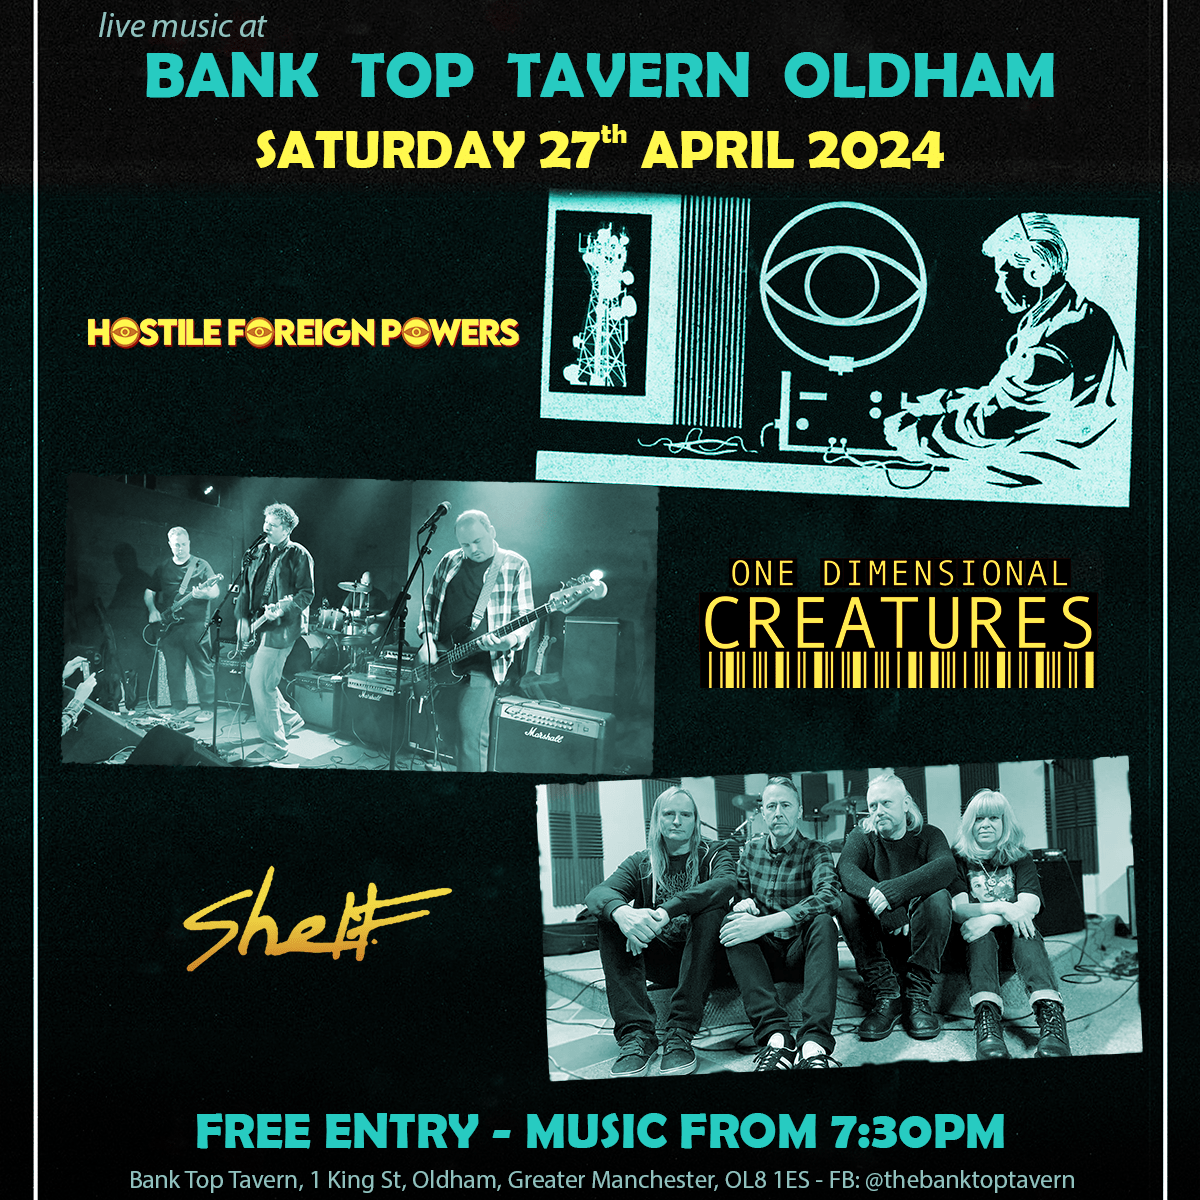 One Dimensional Creatures support Hostile Foreign Powers with Shelf at Bank Top Tavern, Oldham on 27th April 2024